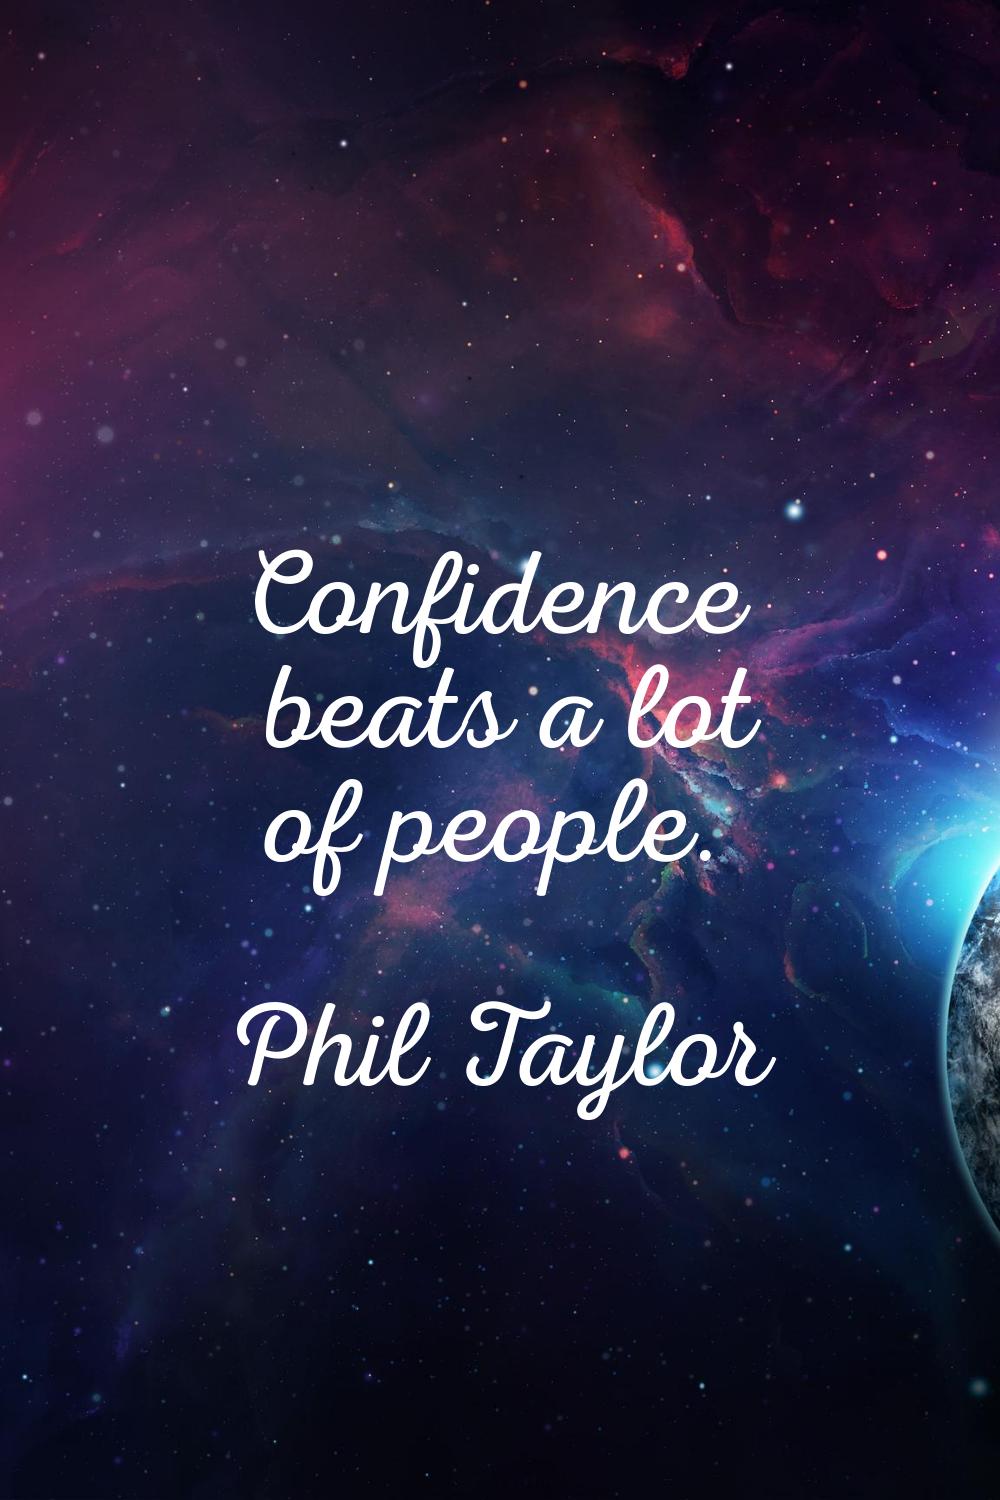 Confidence beats a lot of people.